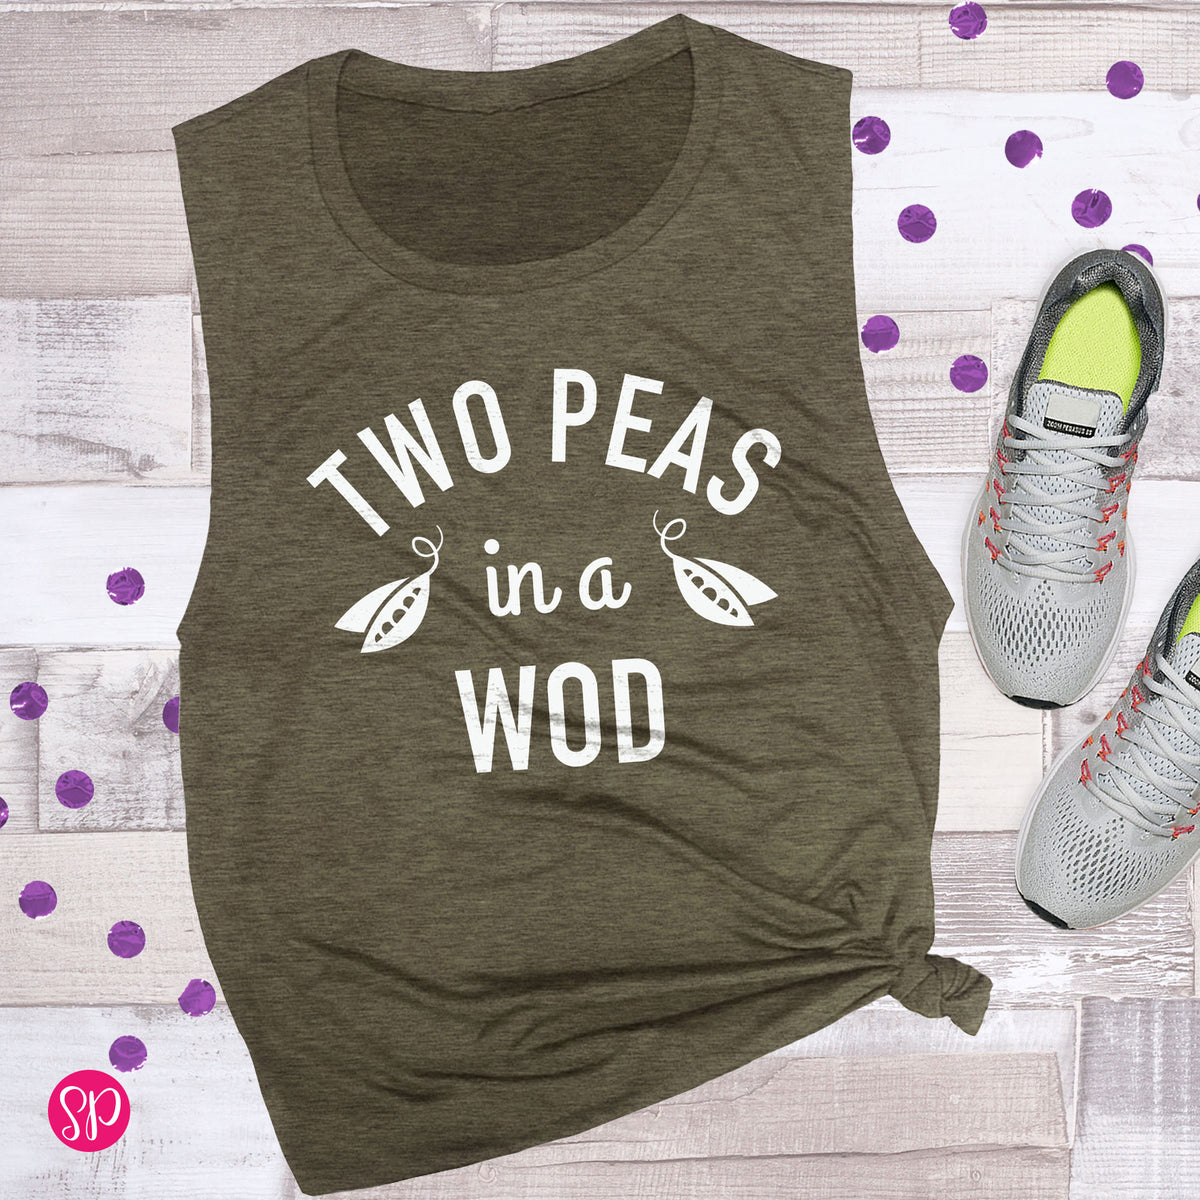 Two Peas in a WOD Workout Of the Day Crossfit Fitness Buddies Muscle Tank Tee Shirt Top